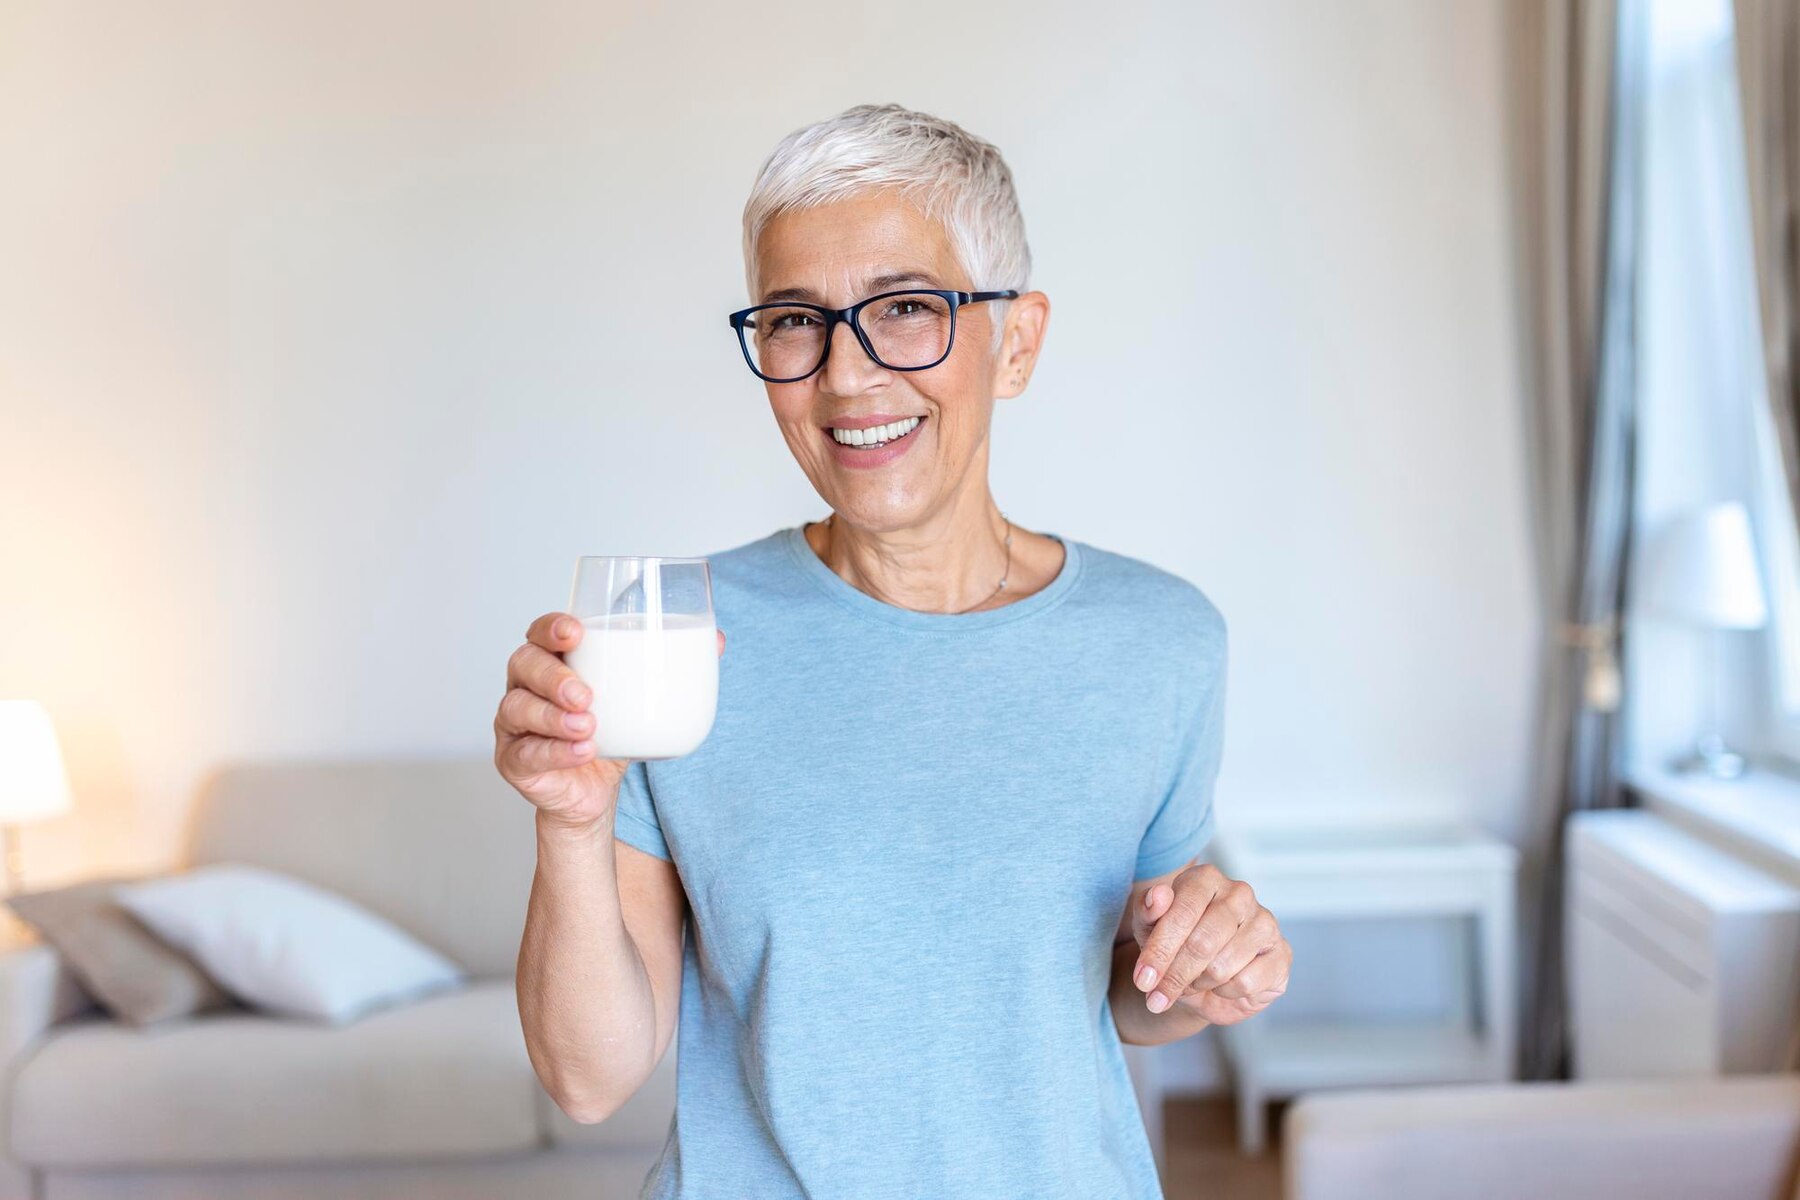 senior-woman-holding-glass-of-milk-at-home-middle-age-woman-drinking-a-glass-of-fresh-milk-with-a-happy-face-standing-and-smiling-with-a-confident-smile-showing-teeth_657921-222.jpg